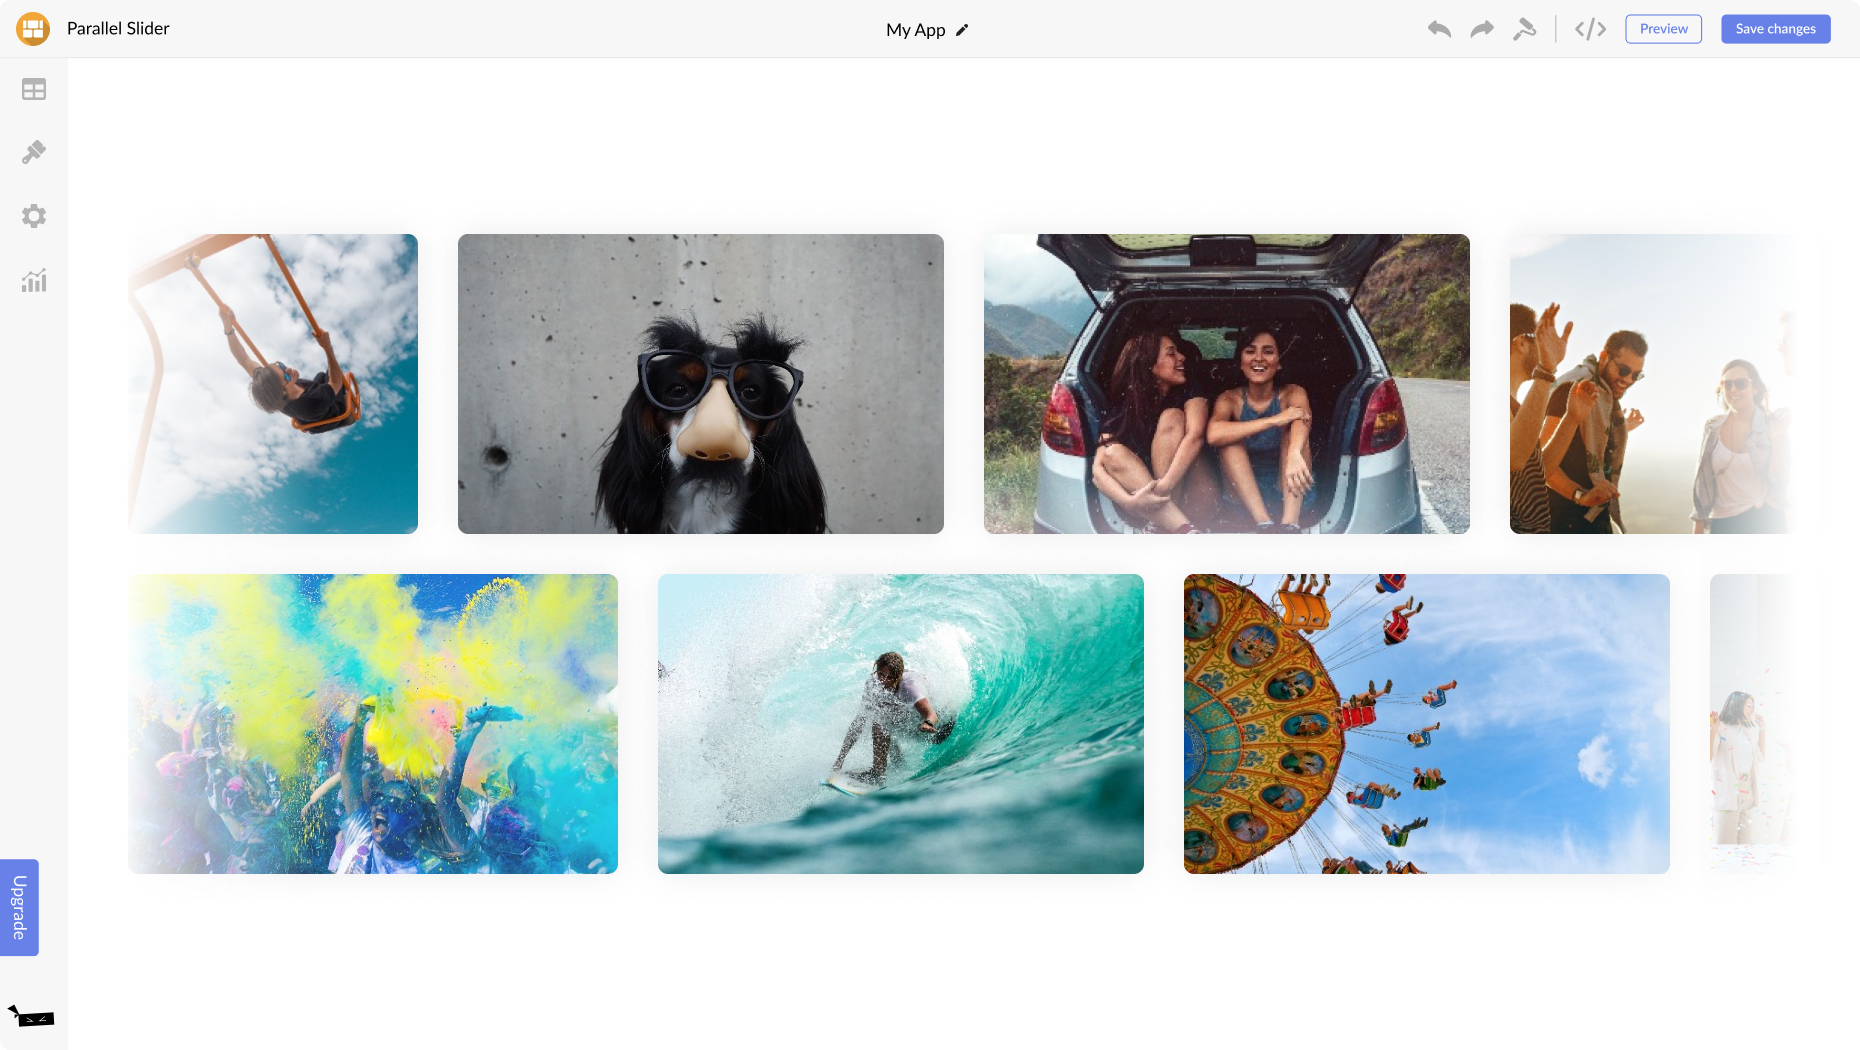 Multi-Row Image Slider for ePages